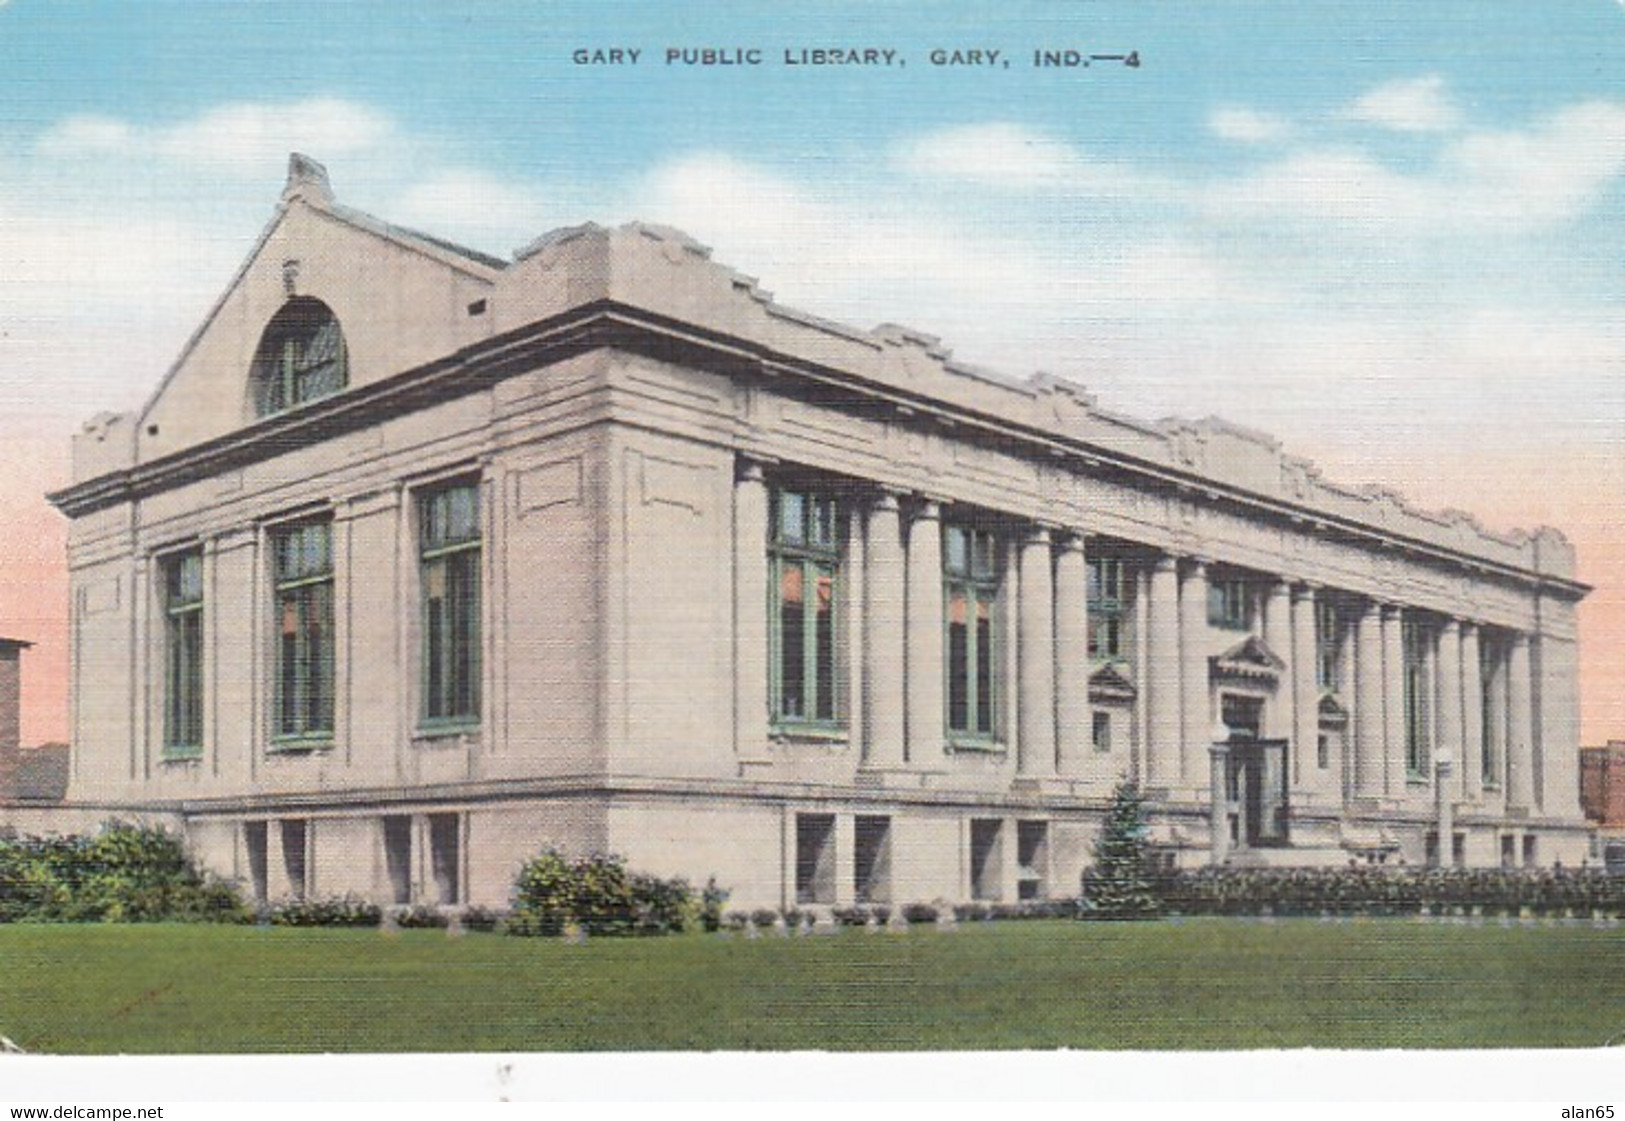 Gary Indiana, Gary Public Library Building Architecture, C1930s Vintage Postcard - Bibliotecas